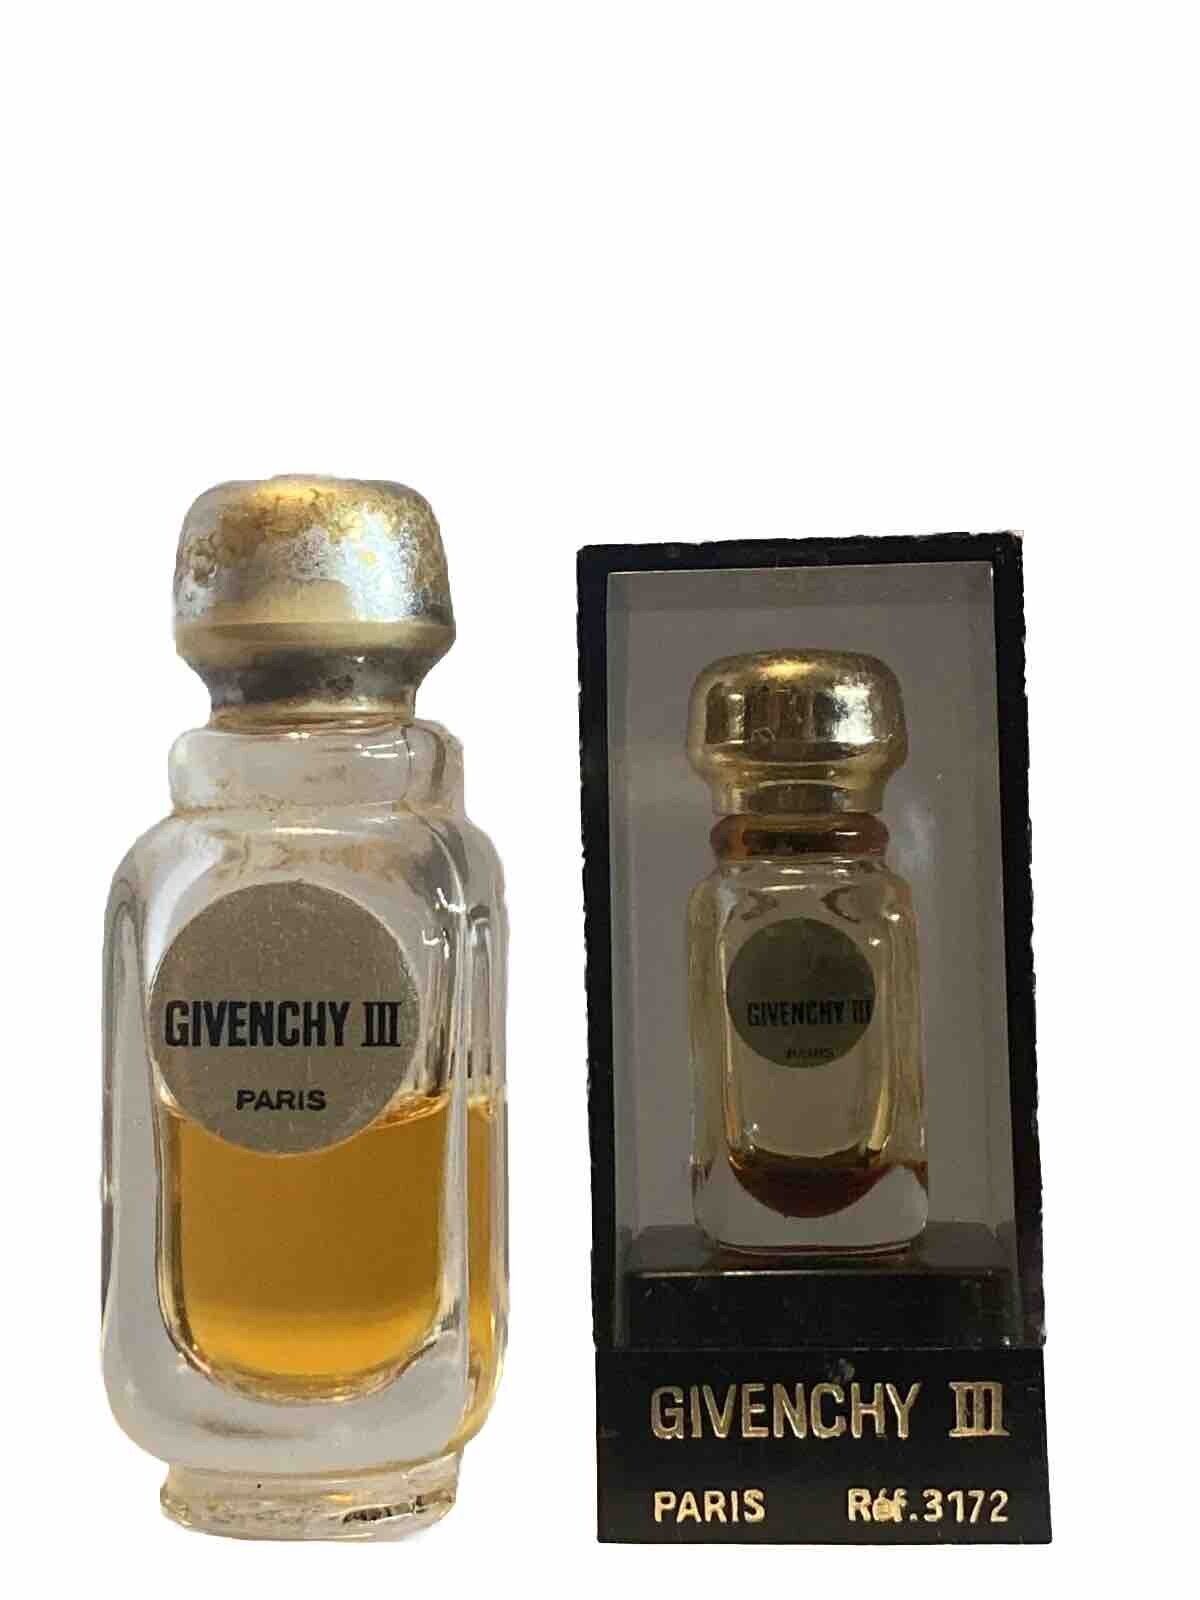 Givenchy III Perfume 1/4oz/7.5ml; ALSO Micro Mini In Case VINTAGE COLLECTORS